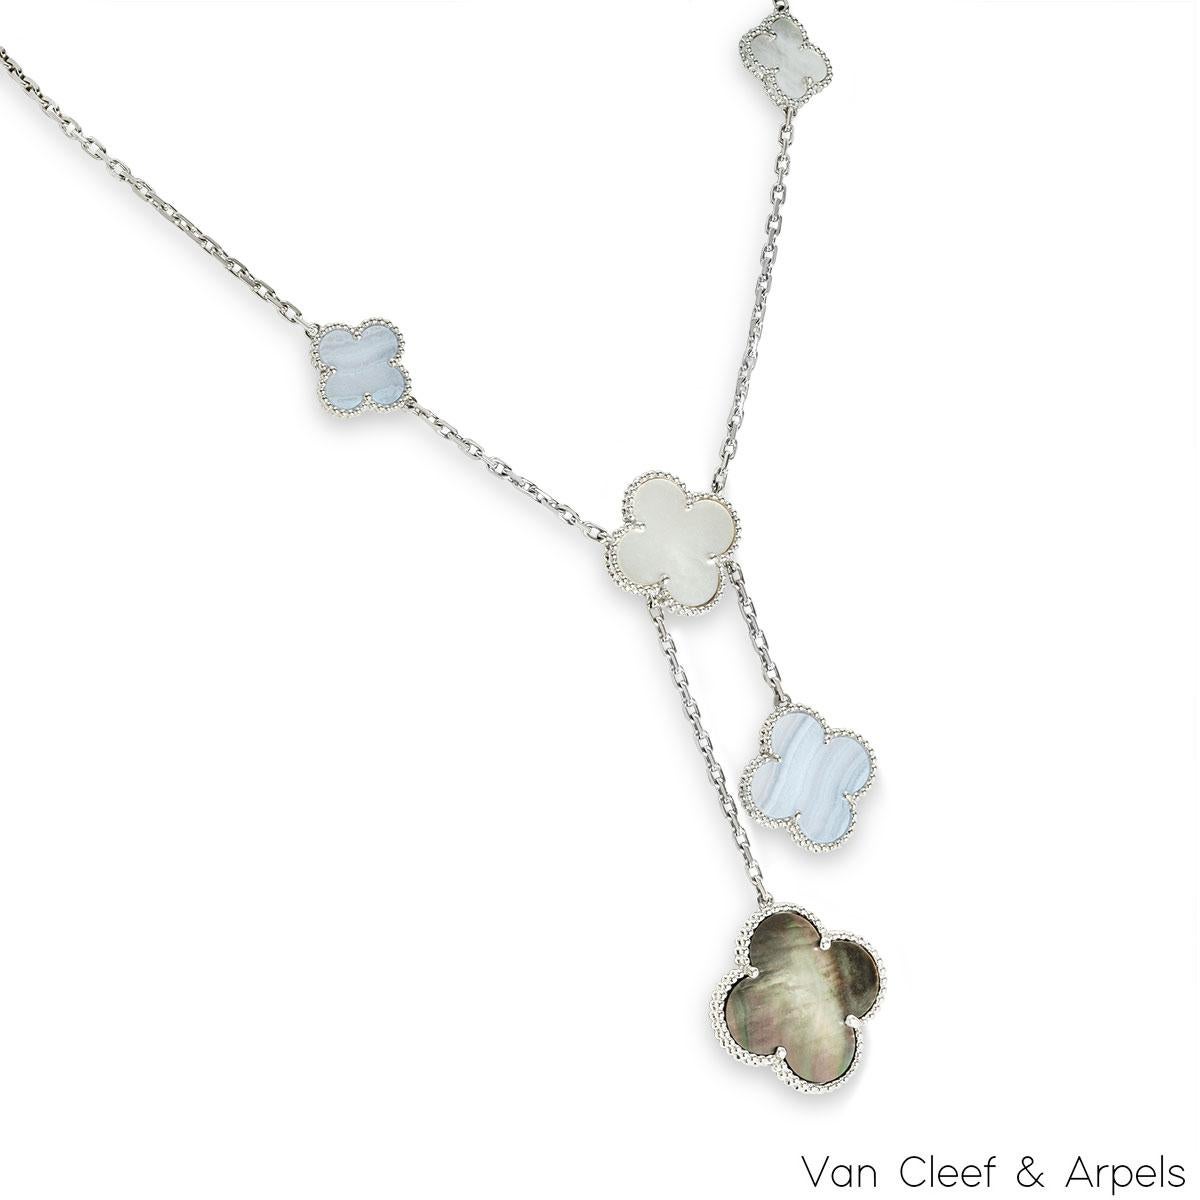 A luxurious 18k white gold necklace by Van Cleef & Arpels from the Magic Alhambra collection VCARN18900. The necklace features 6 four leaf clover motifs alternating in size, set with chalcedony, grey and white mother of pearl inlays complemented by